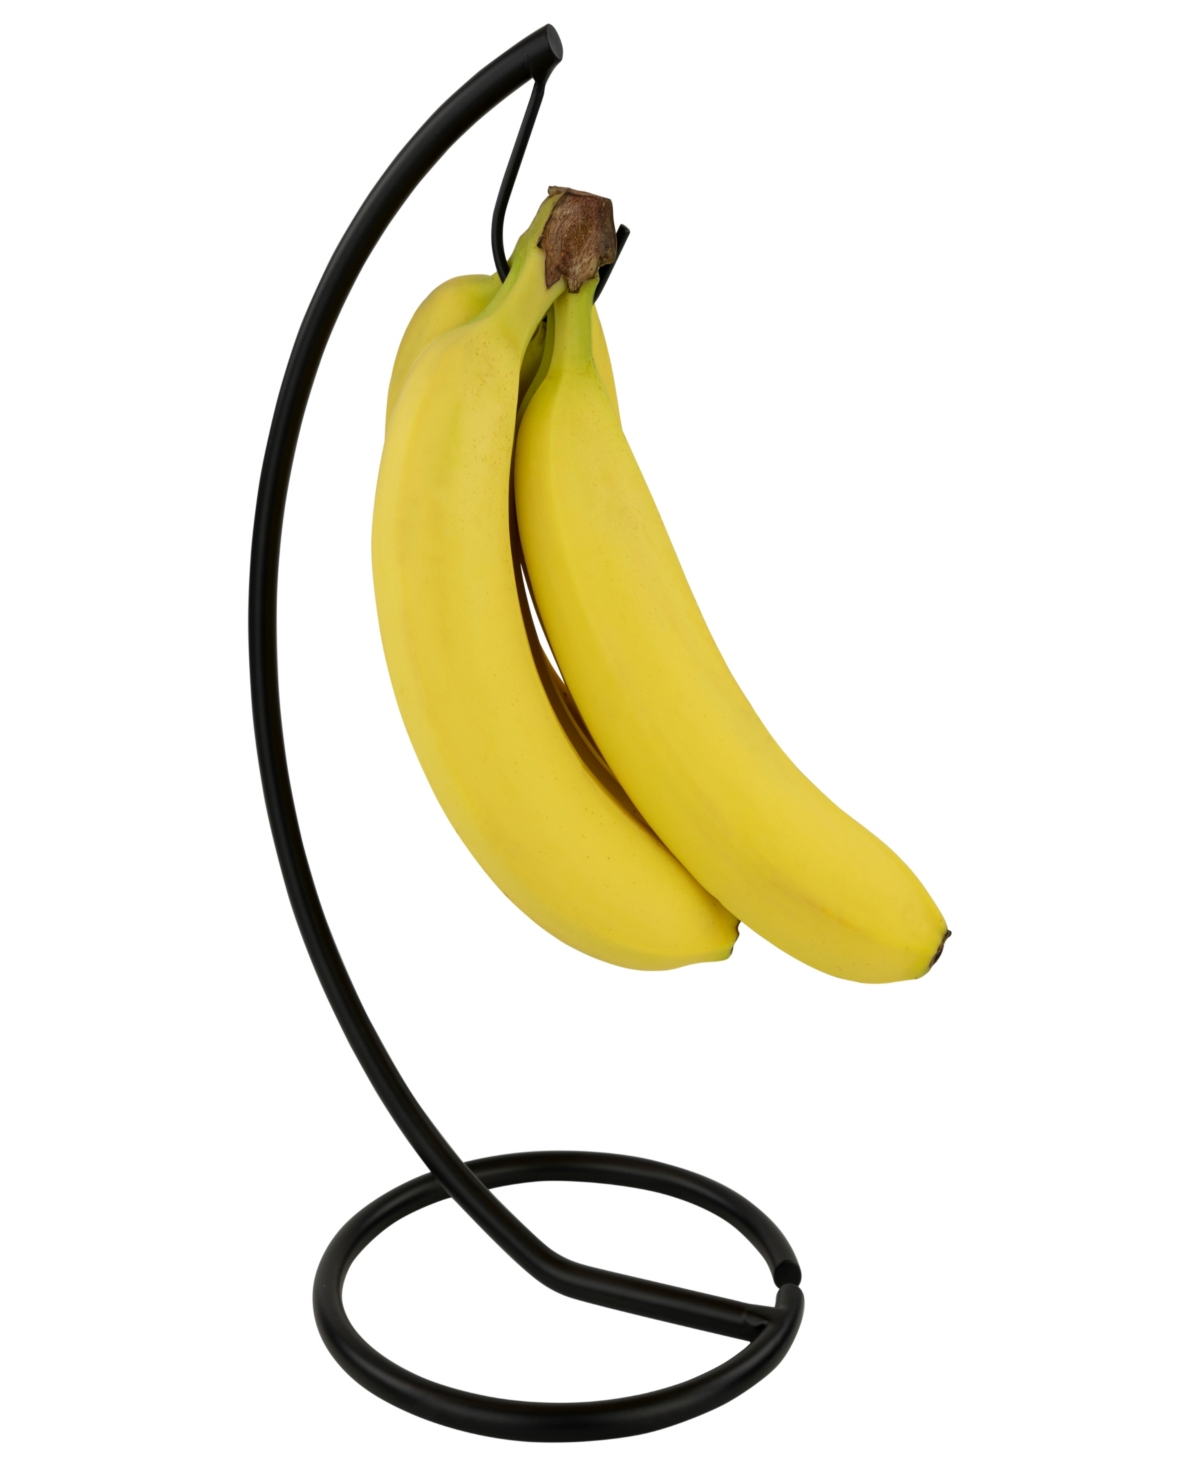 Shop Spectrum Euro Banana Holder For Storage And Display In Black